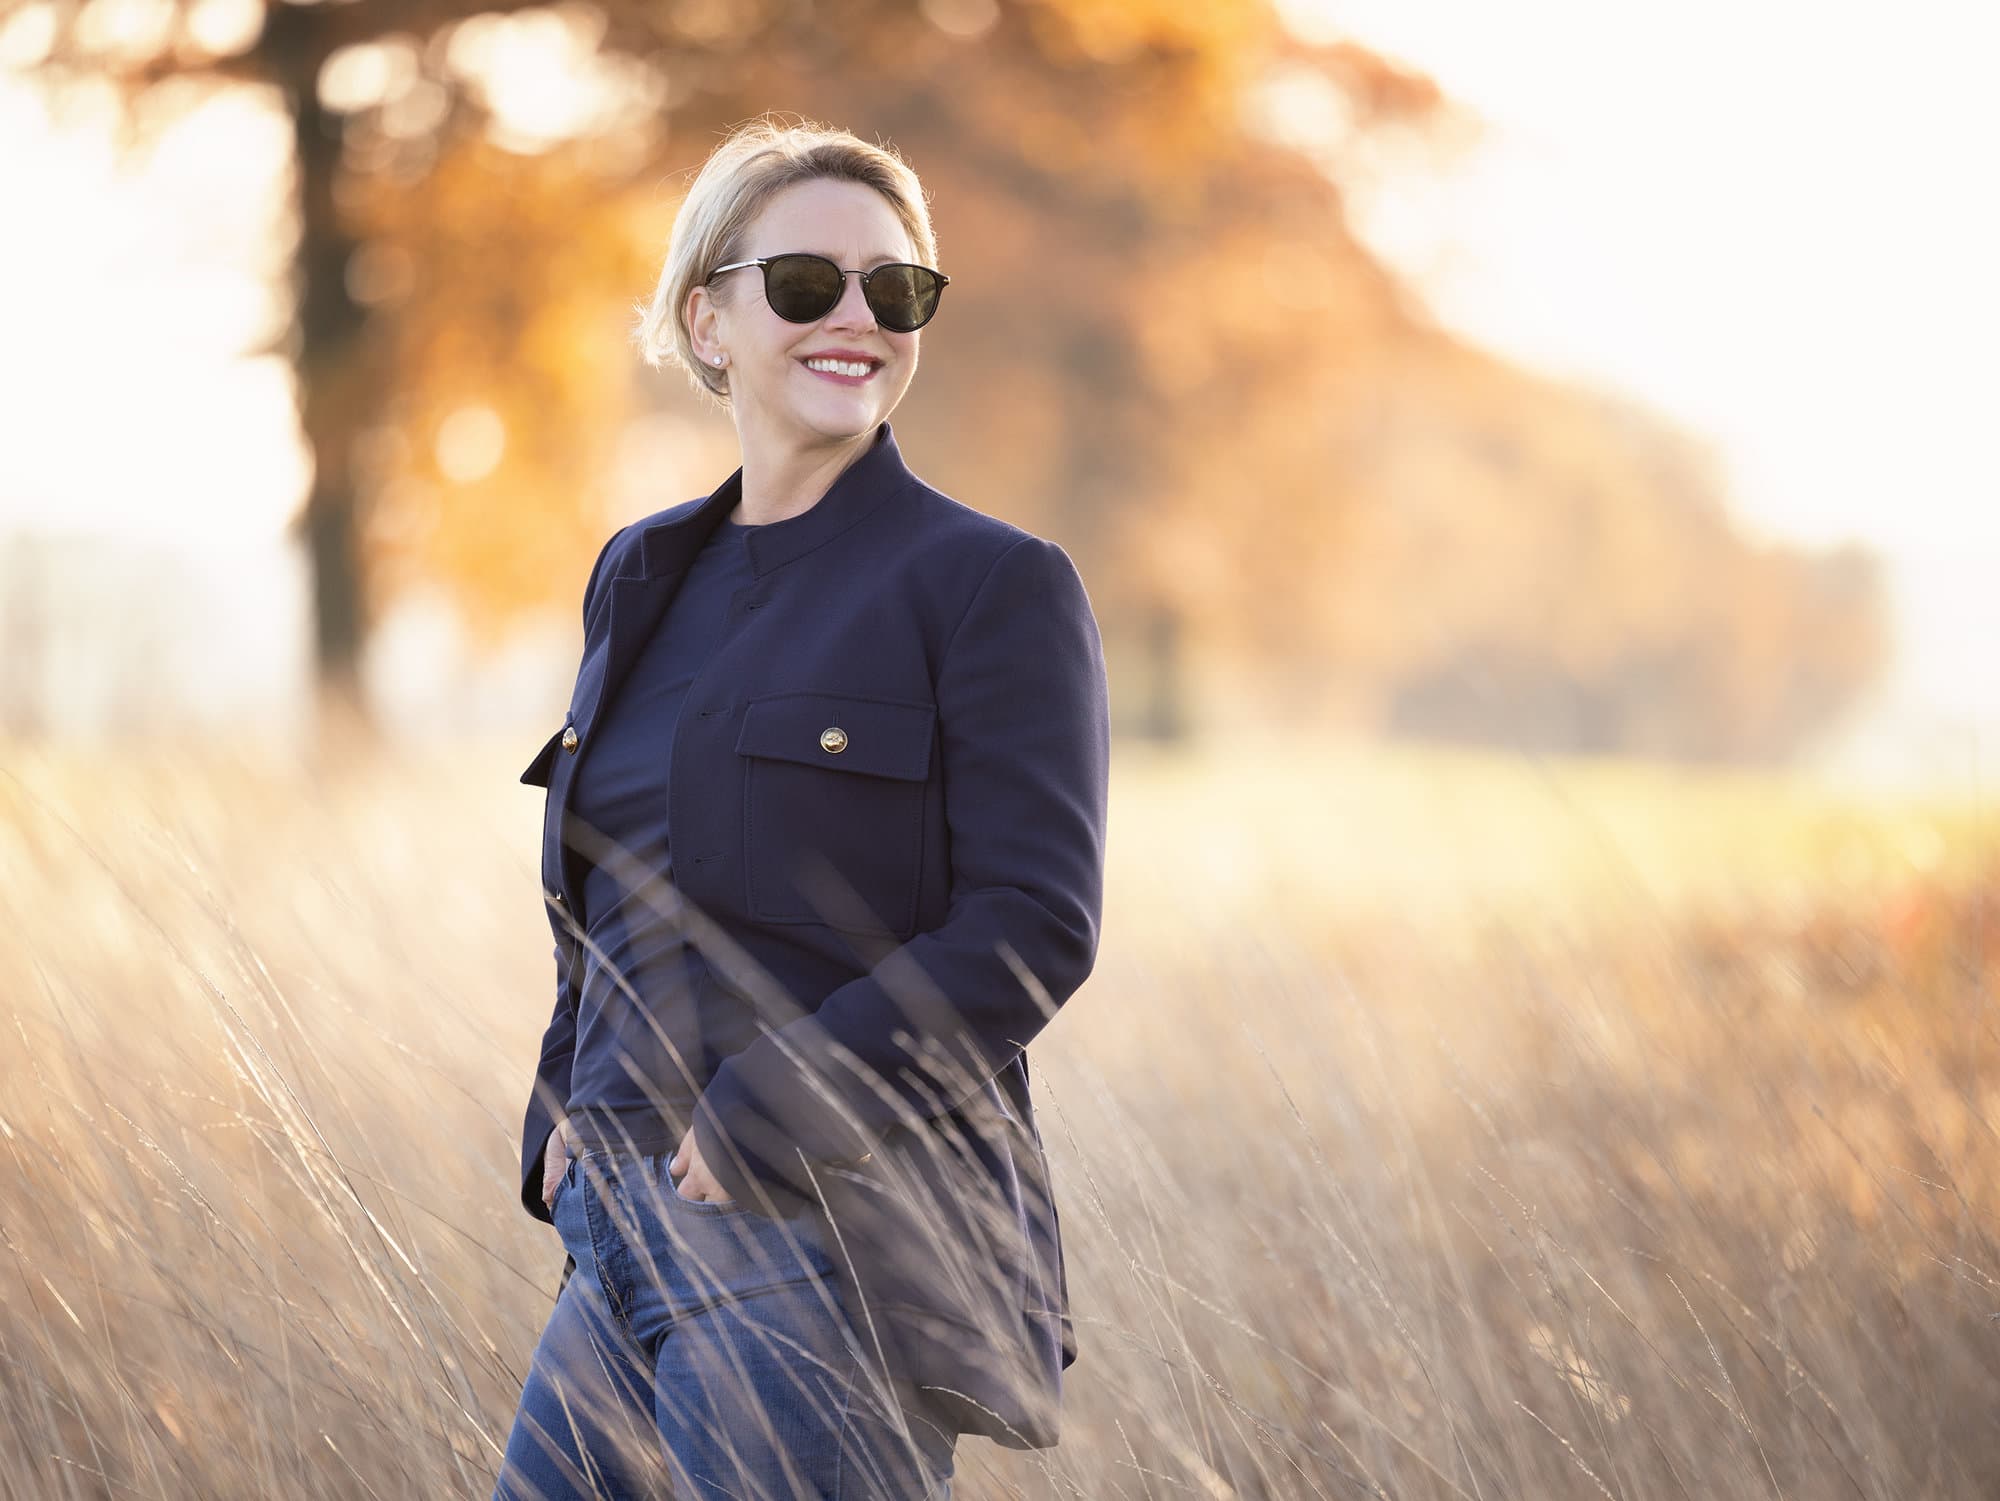 Personal branding portrait of a Nutritionalist and life coach smiling while looking over her shoulder while walking in a field of long grass